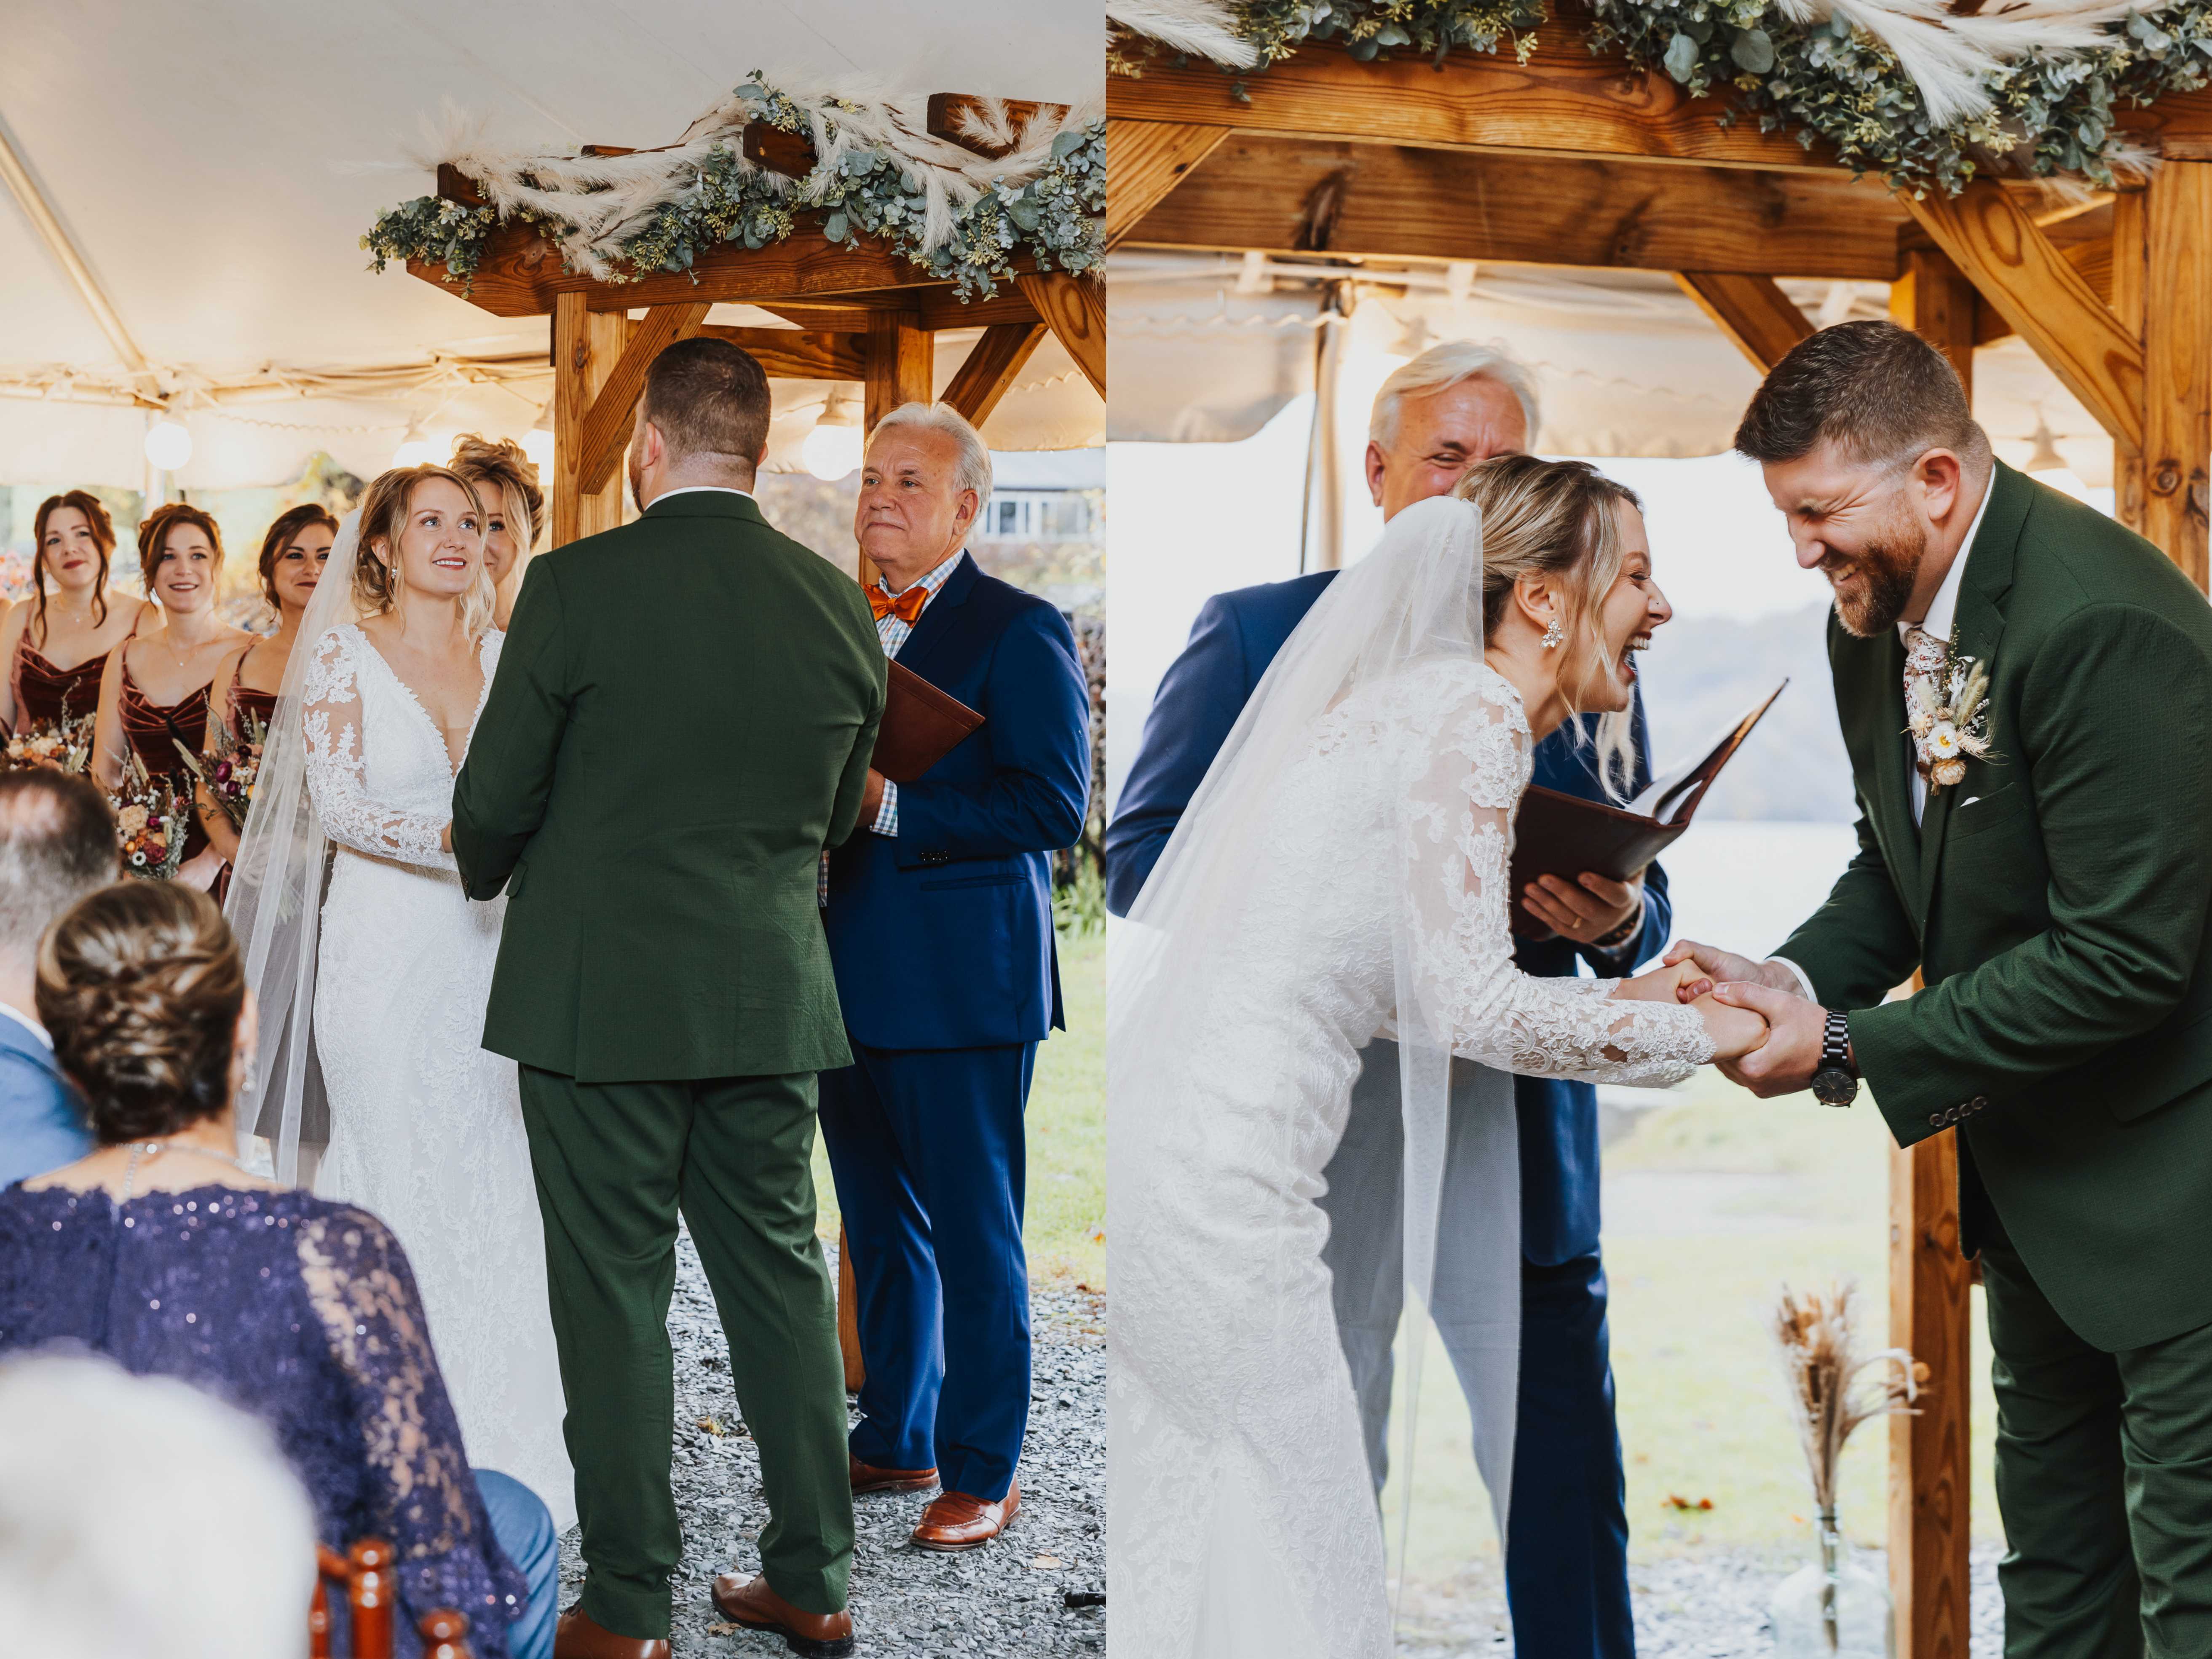 2 photos side by side, the left is of a bride looking at the groom during their wedding ceremony under a tent, the right is of the bride and groom both laughing during the ceremony